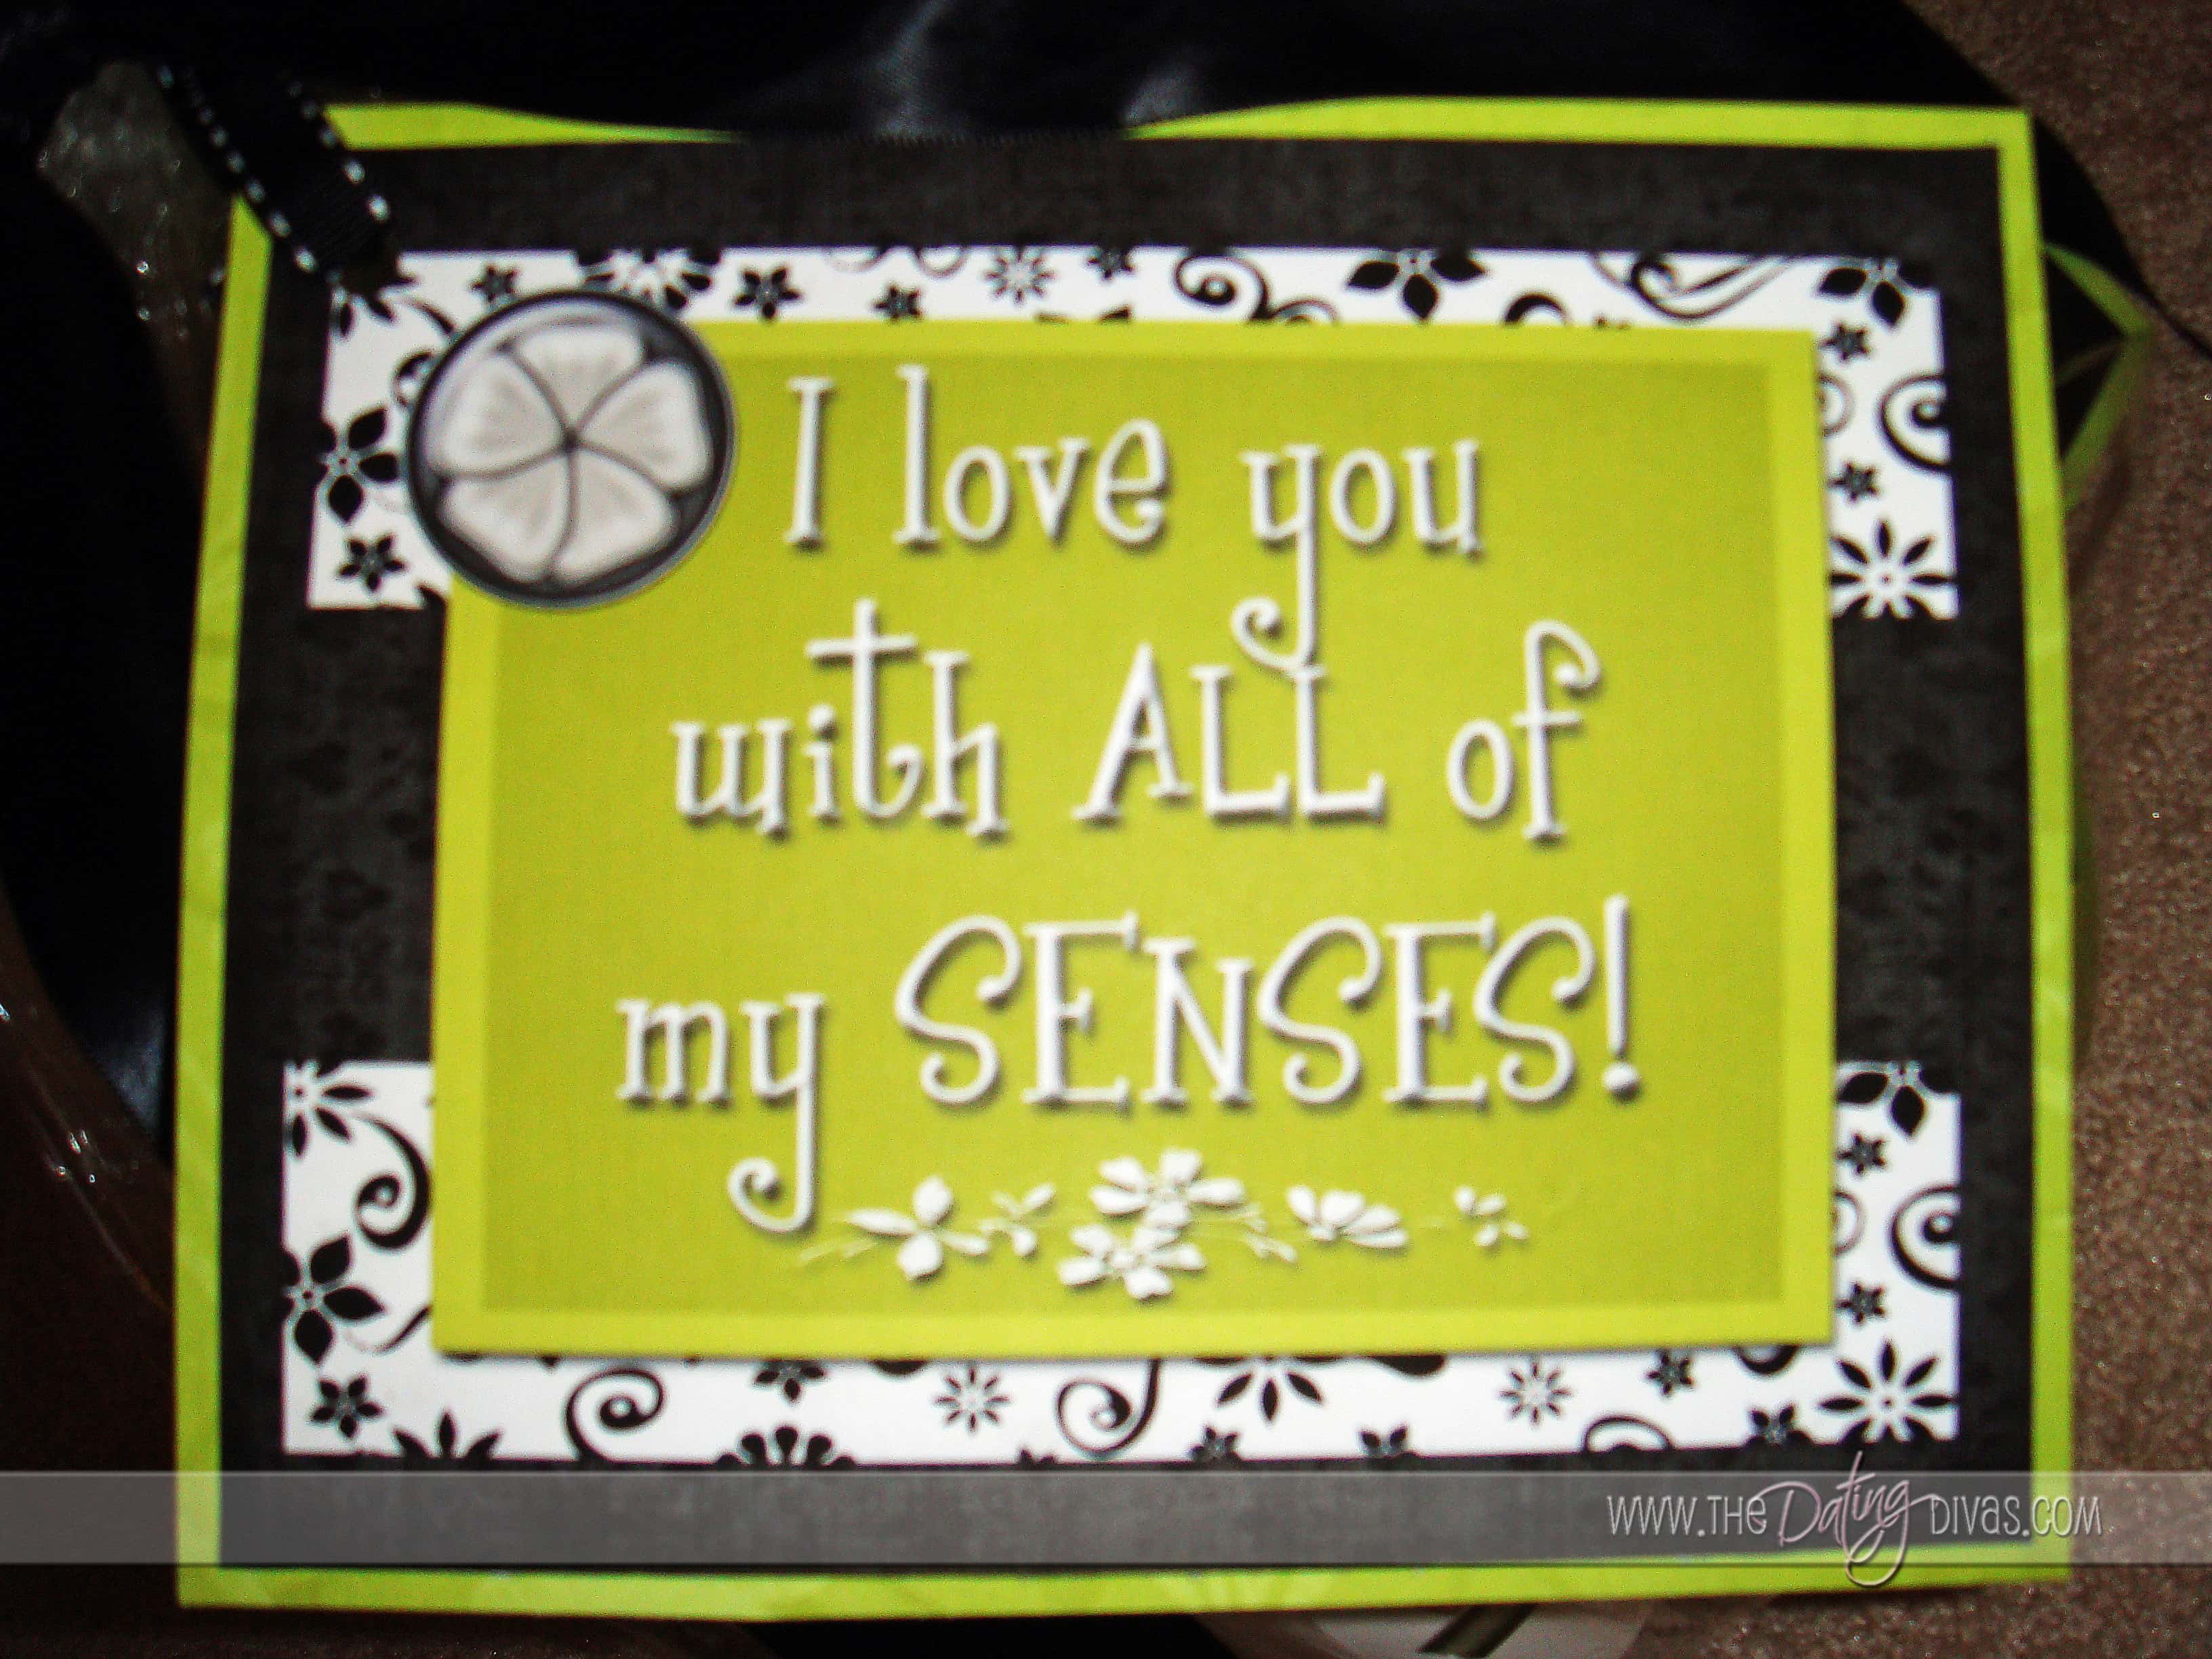 The FIVE Senses Gift Comes with Free Printable Tags